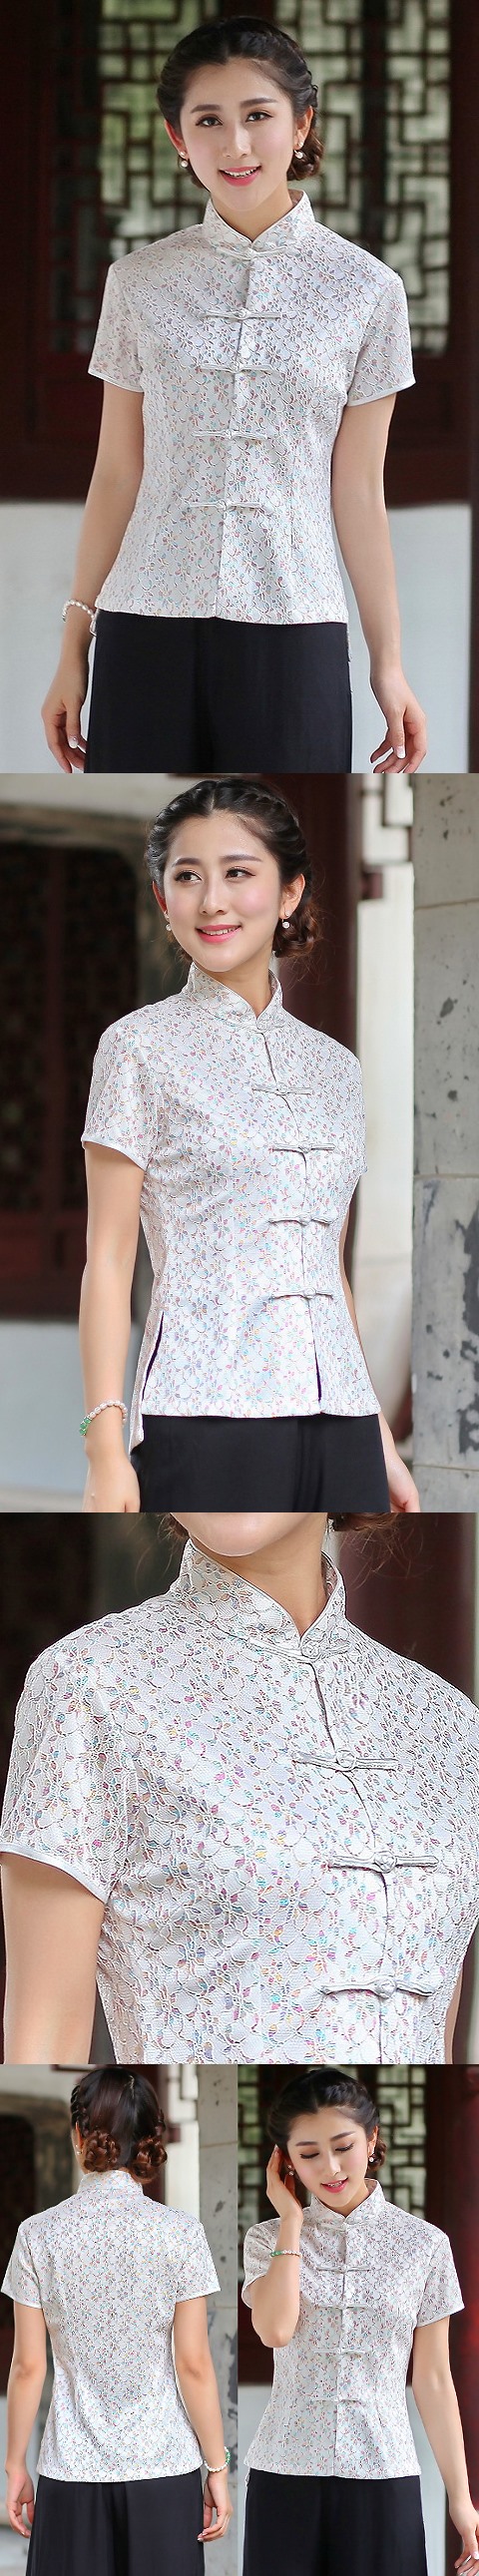 Short-sleeve Chinese Ethnic Lace Blouse (Ready-Made)